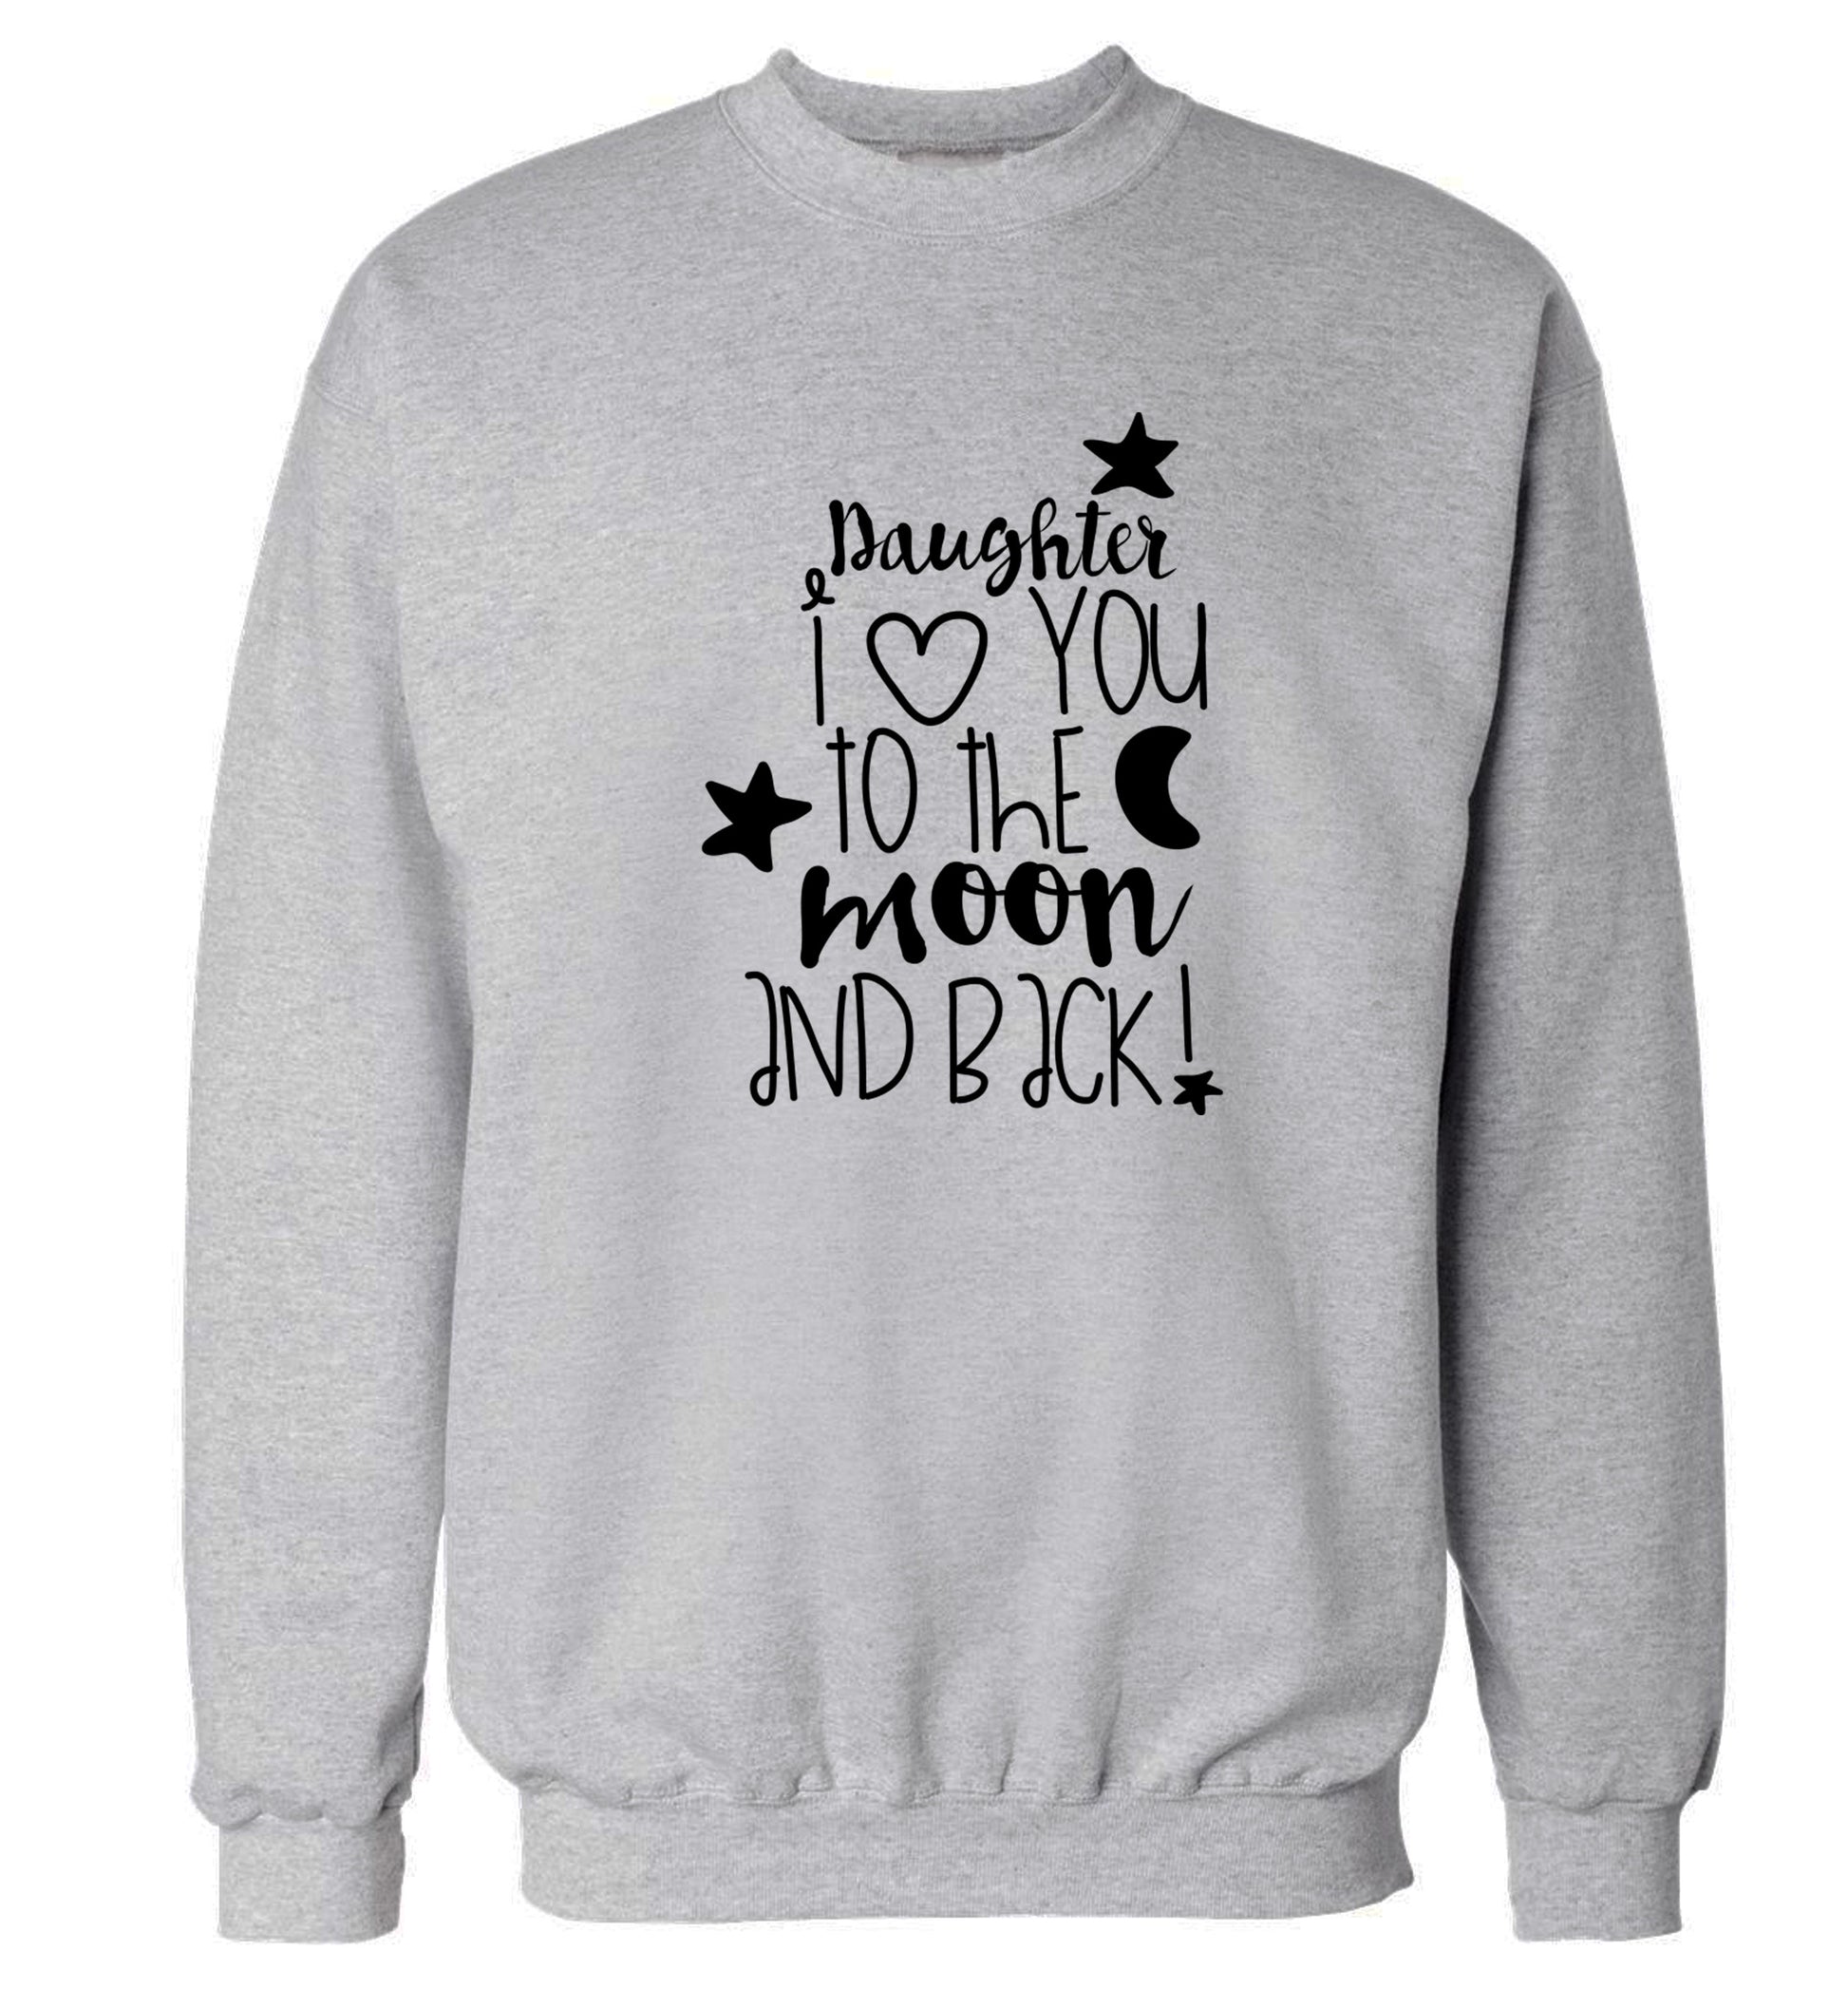 Daughter I love you to the moon and back Adult's unisex grey  sweater 2XL